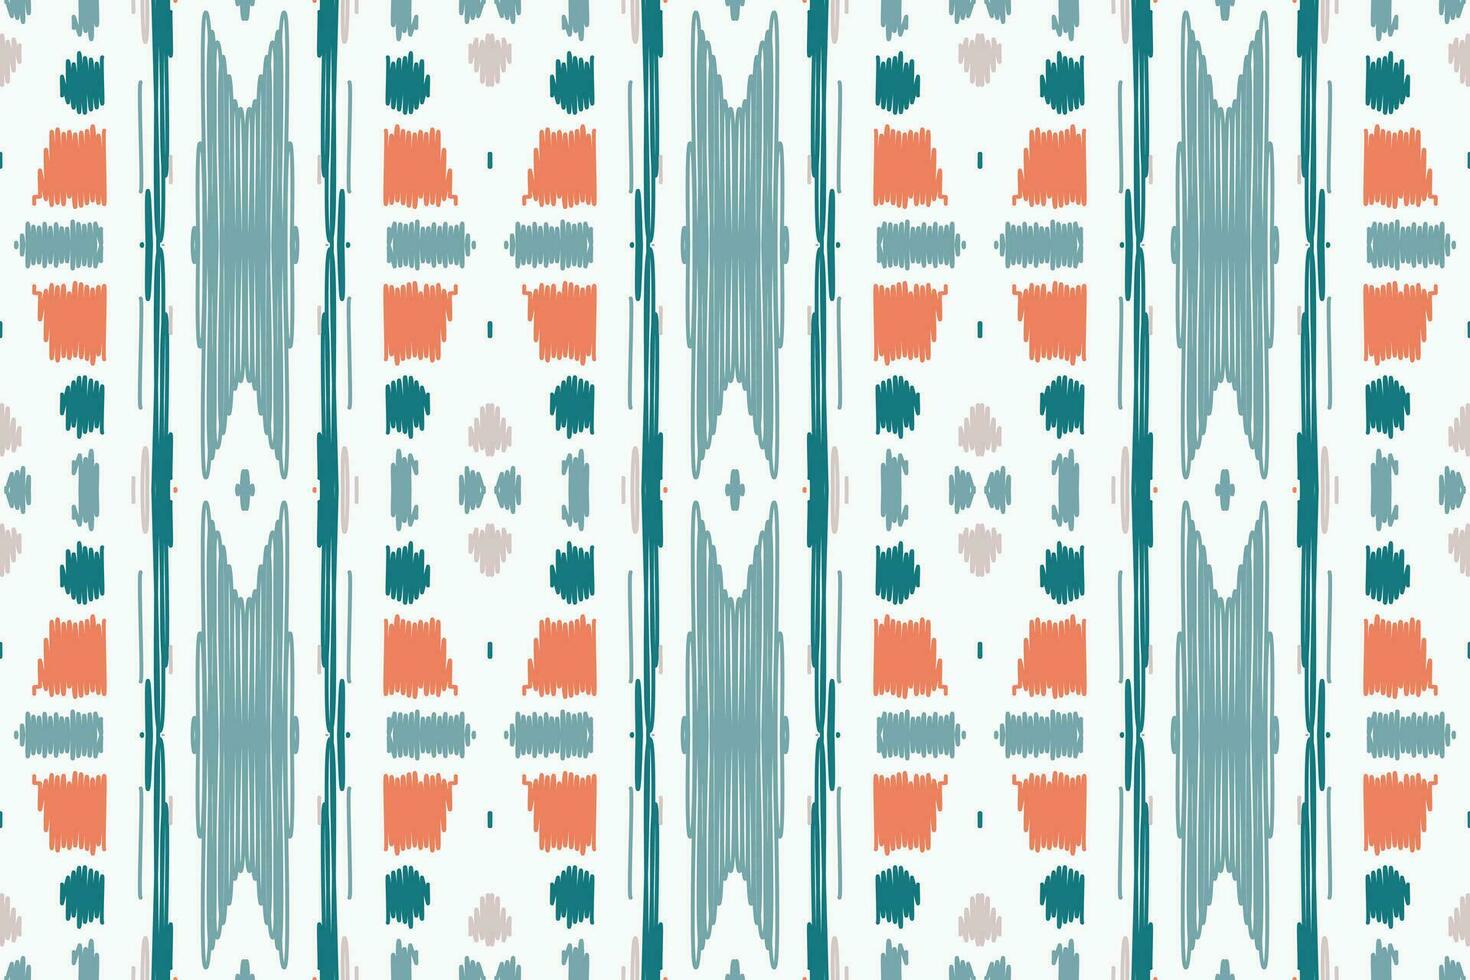 Ikat Damask Embroidery Background. Ikat Aztec Geometric Ethnic Oriental Pattern traditional.aztec Style Abstract Vector illustration.design for Texture,fabric,clothing,wrapping,sarong.